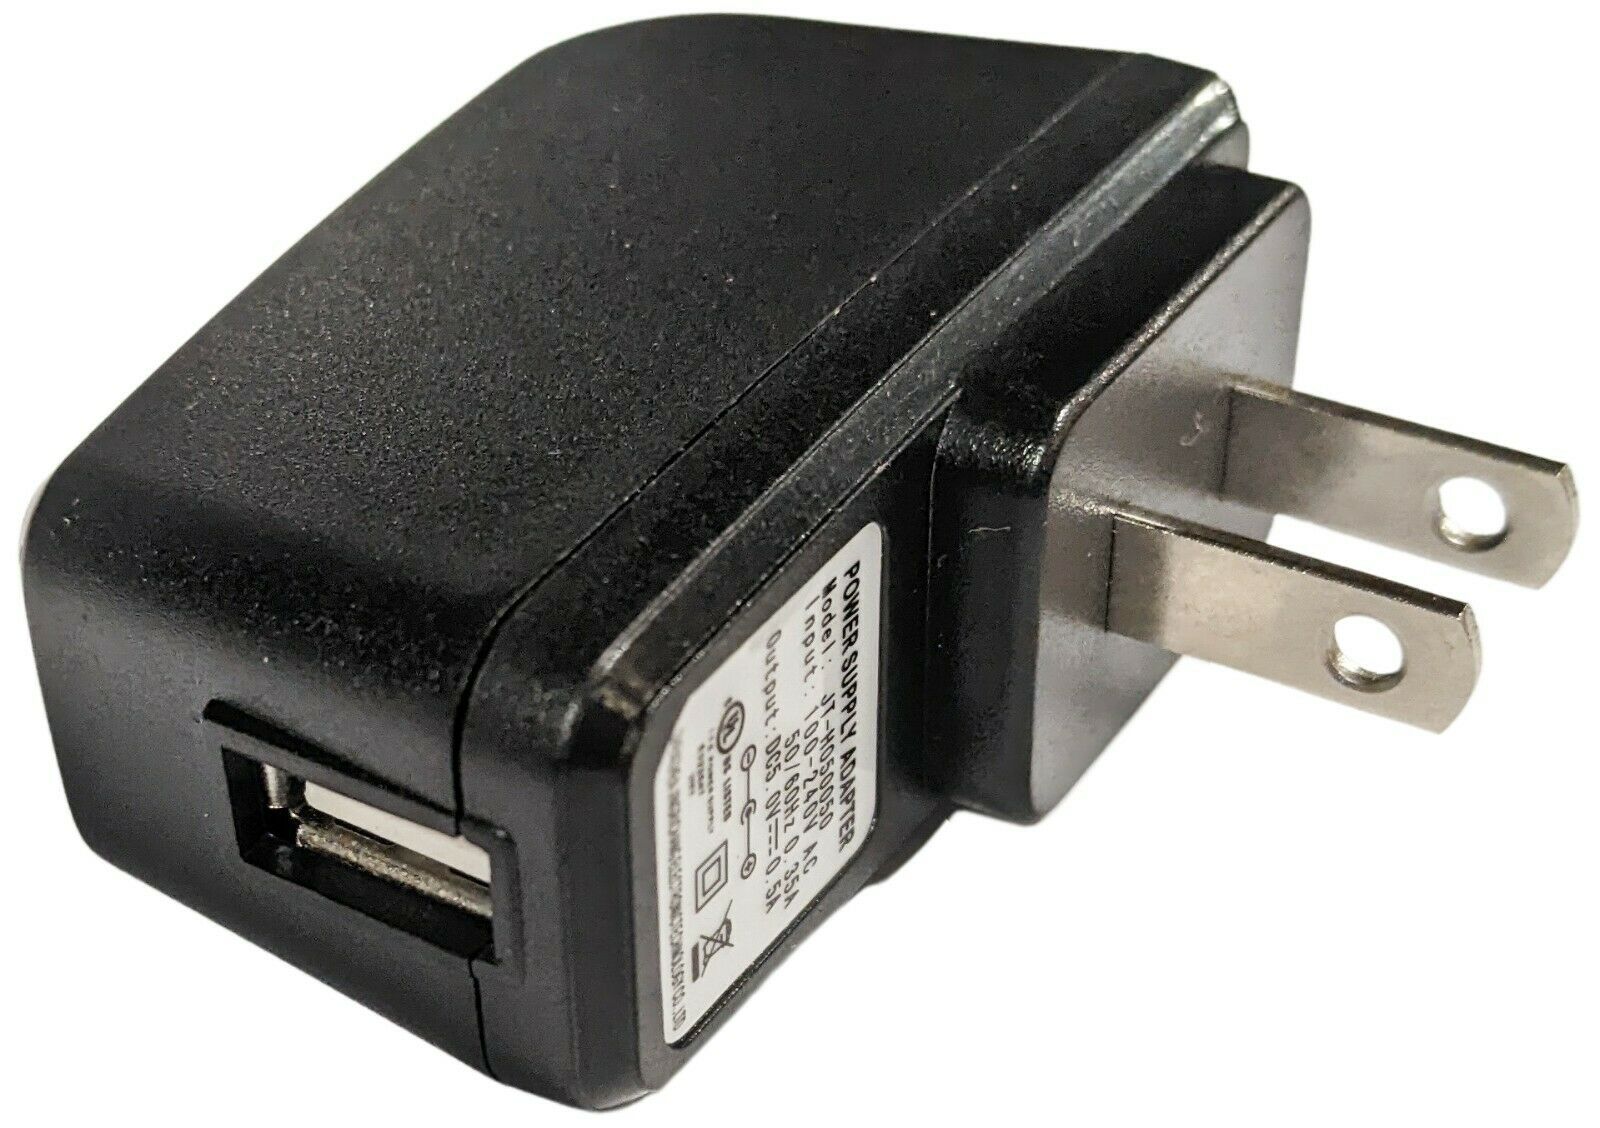 5V DC 0.5A Wall USB Output, 100-240V AC (Cable not inc Electronix